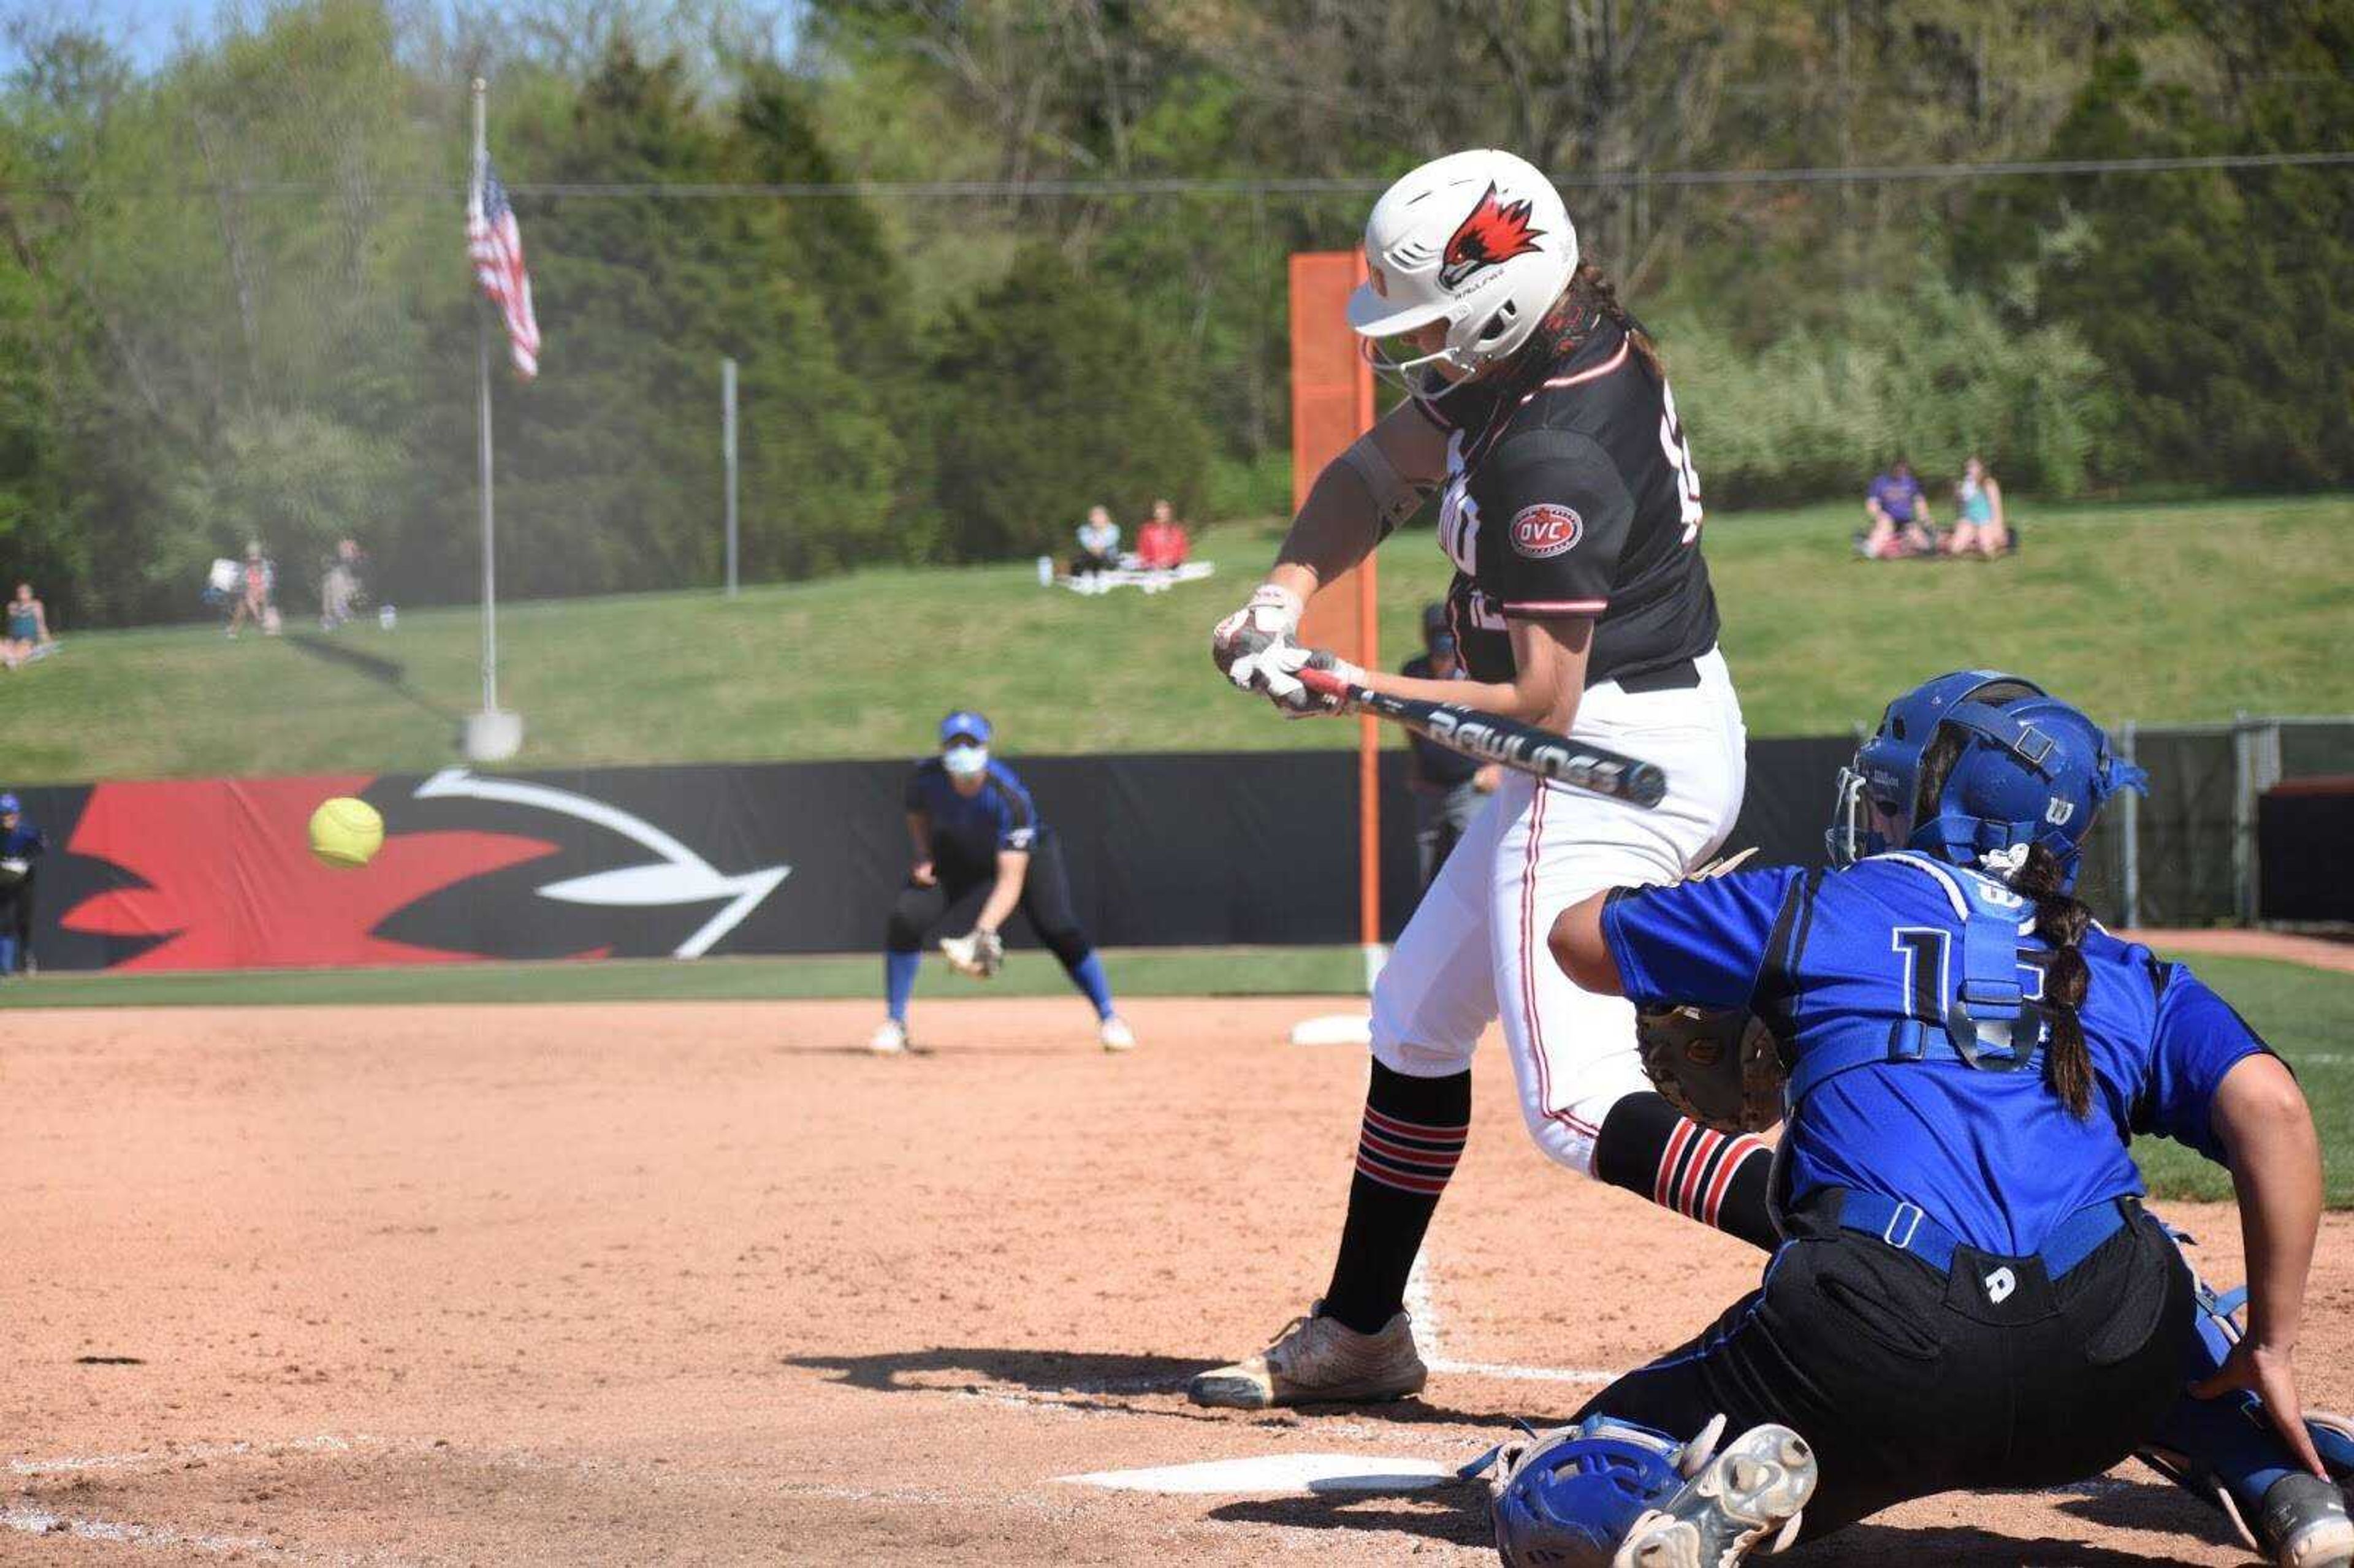 Freshman infielder Katie Dreiling takes a swing during Southeast's 2-0 win over SLU on April 14 at the Southeast Softball Complex in Cape Girardeau.